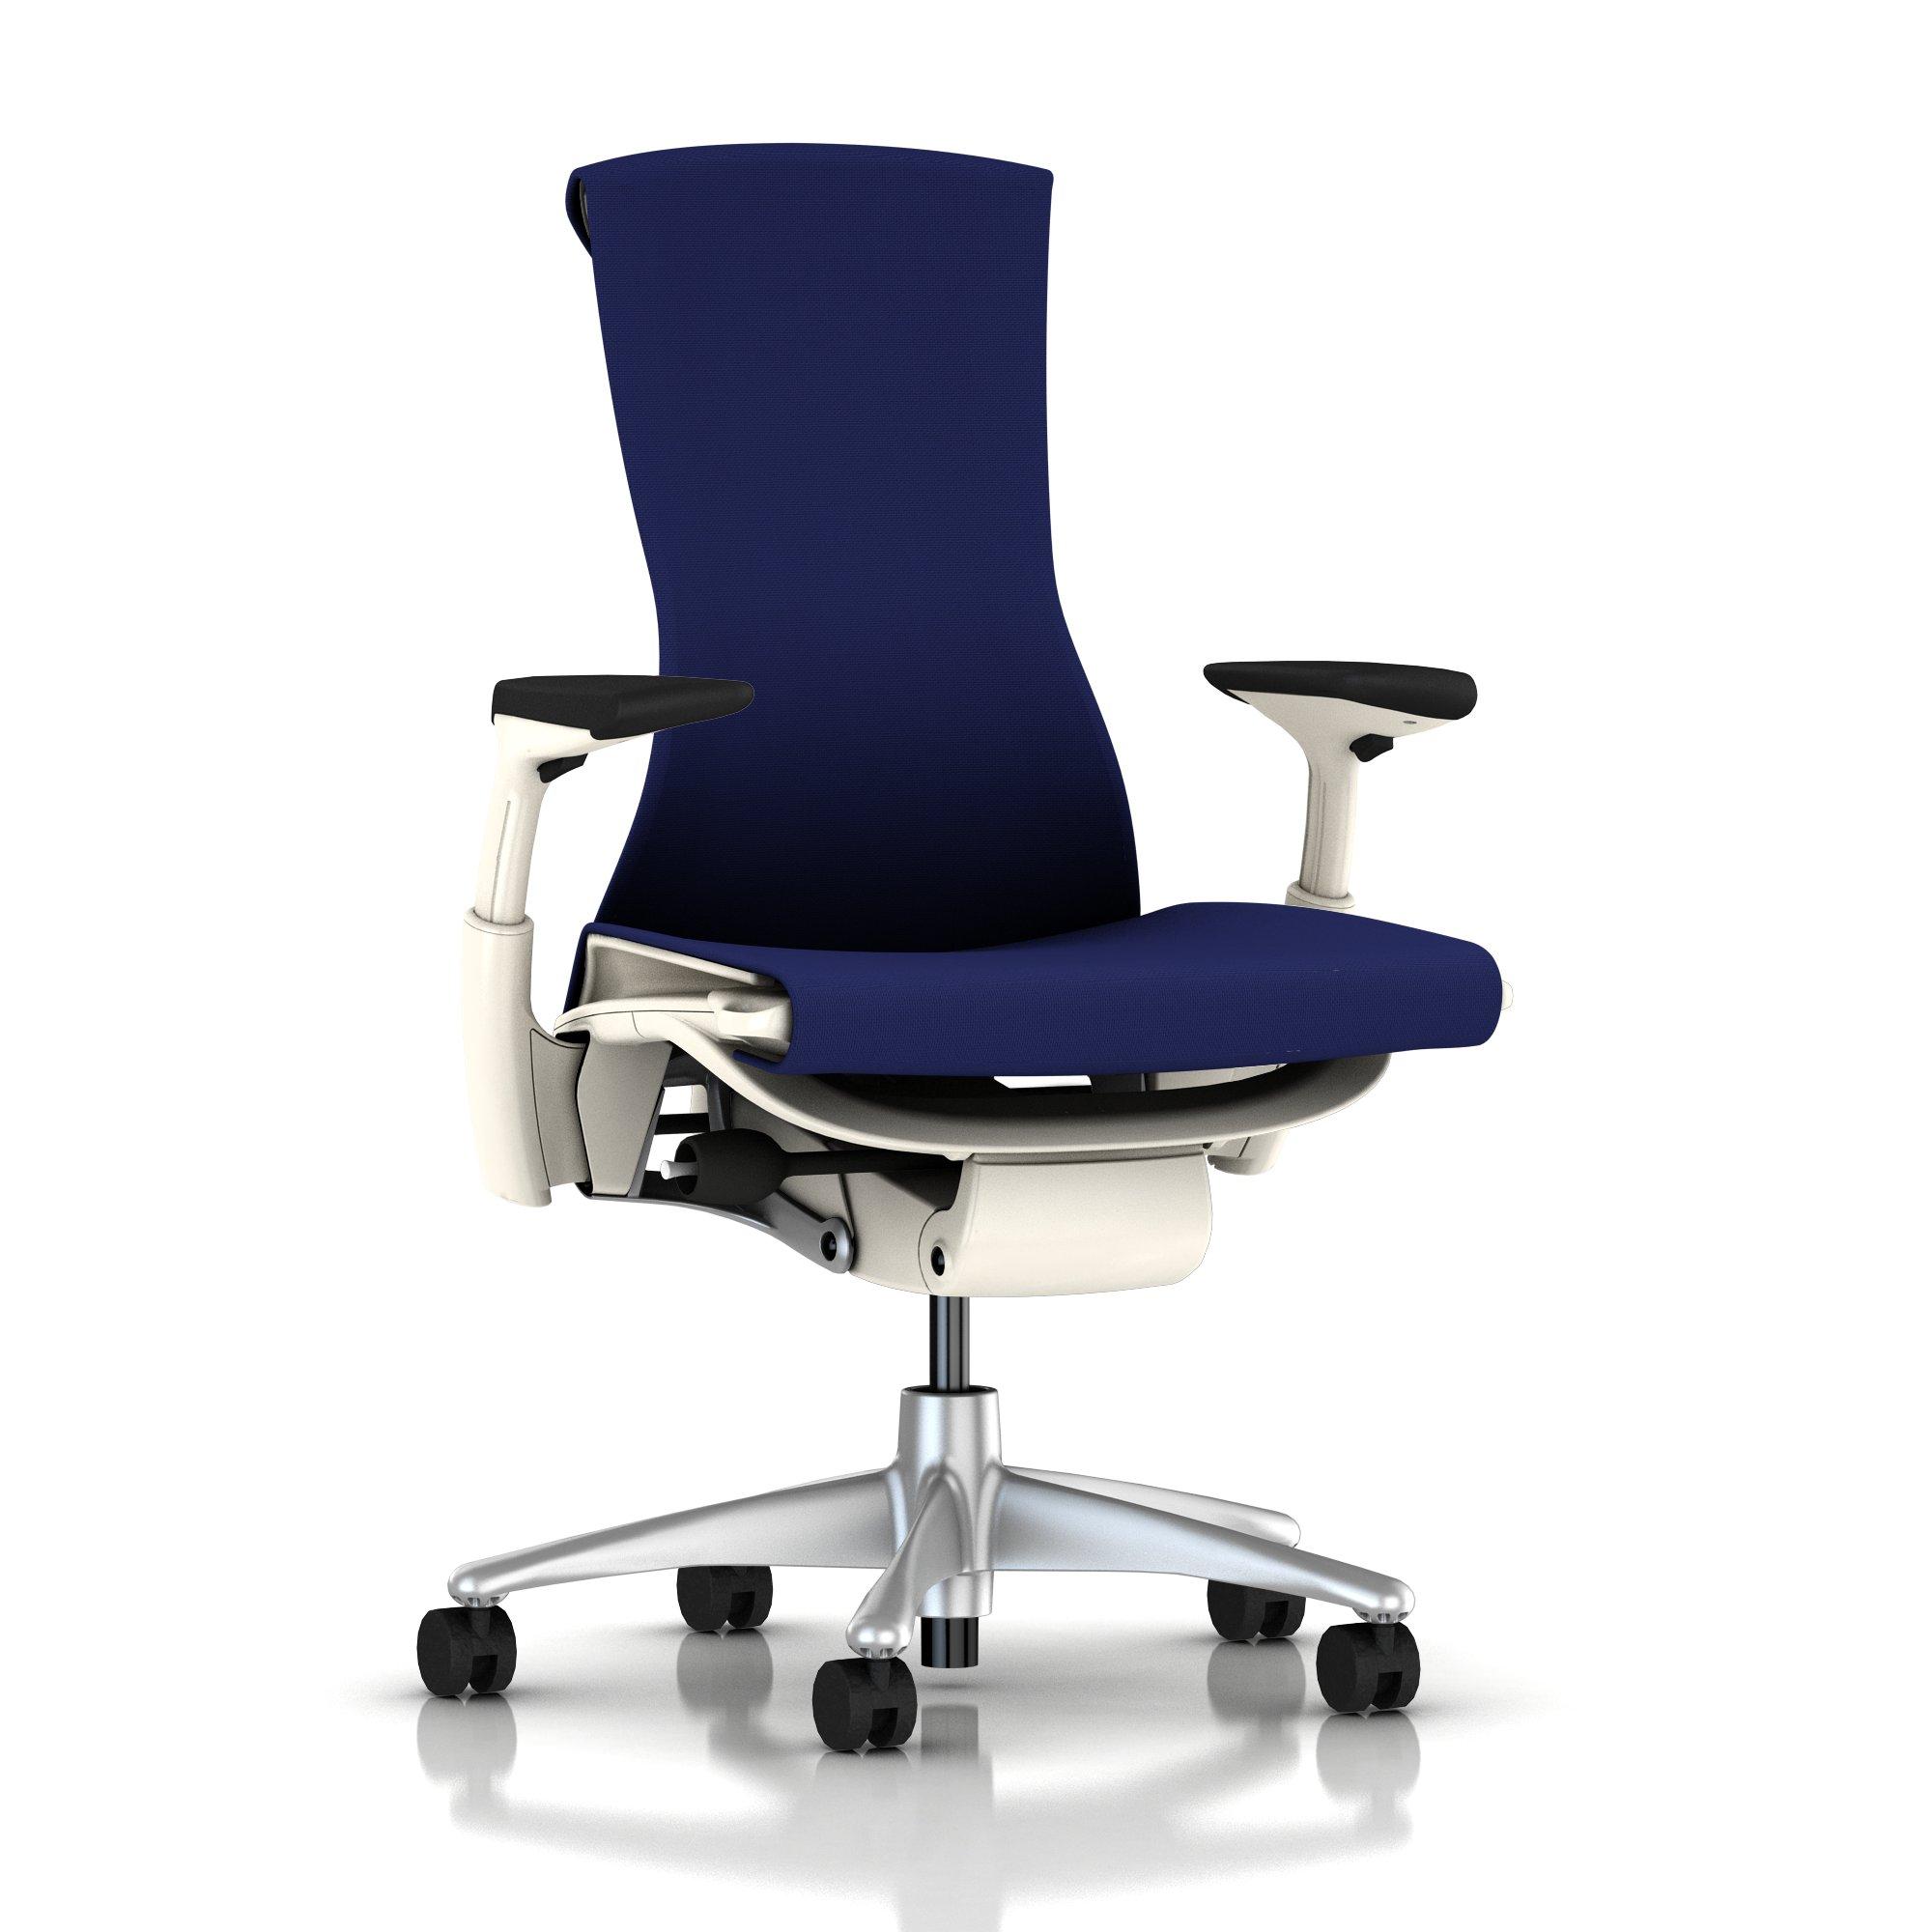 Embody Chair Twilight Blue Rhythm with White Frame and Titanium Base by Herman Miller